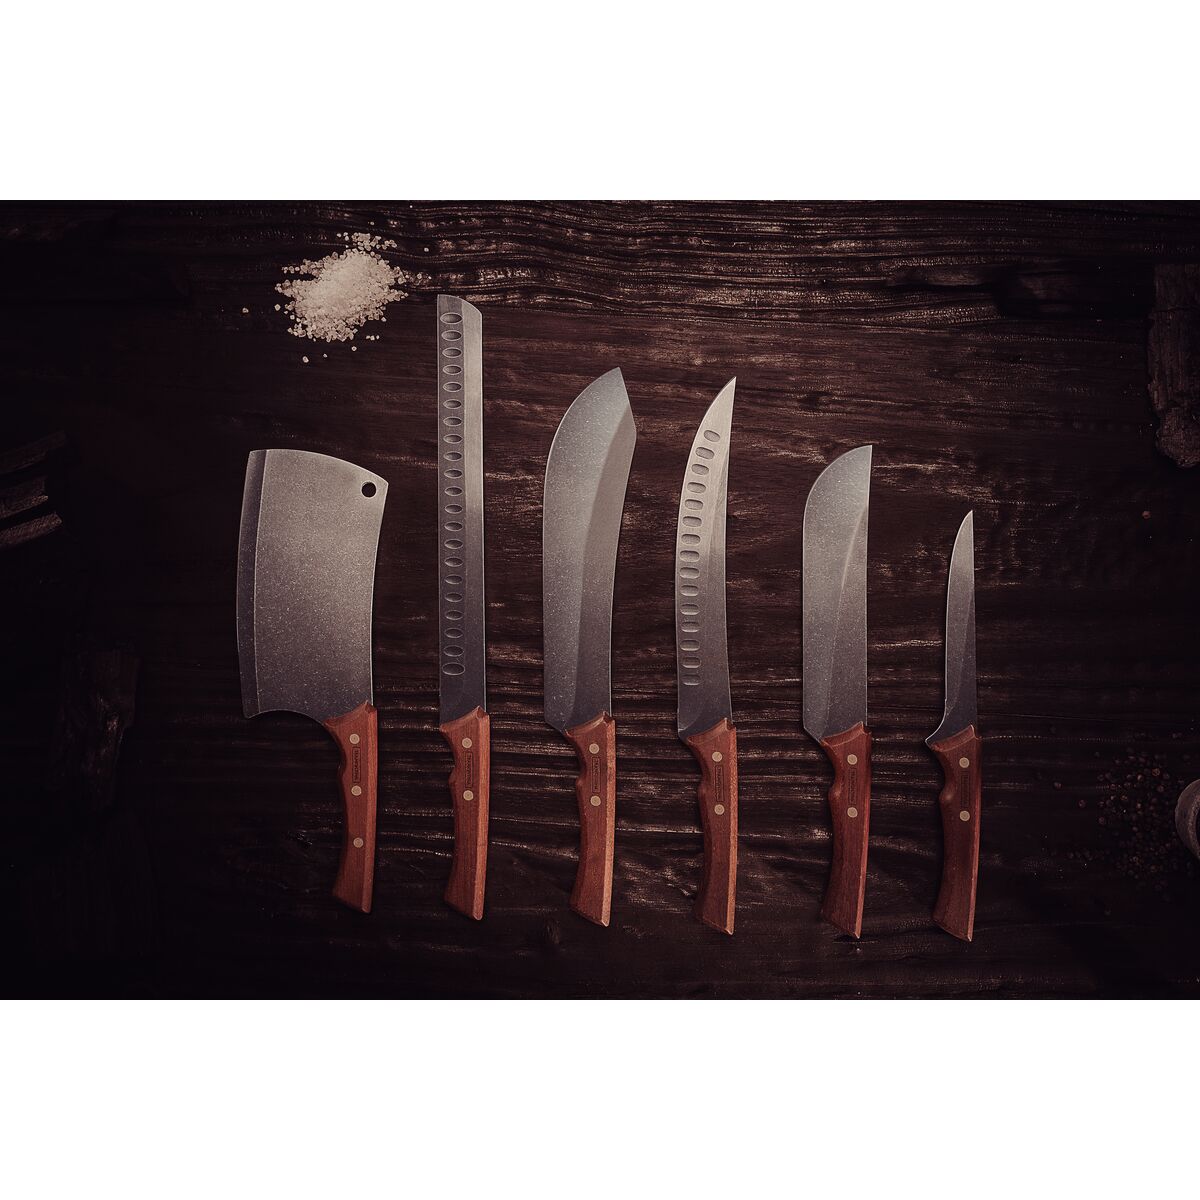 Tramontina Churrasco Black Boning Knife with Blackened Stainless Steel Blade and 6" Wooden Handle - citiplants.com